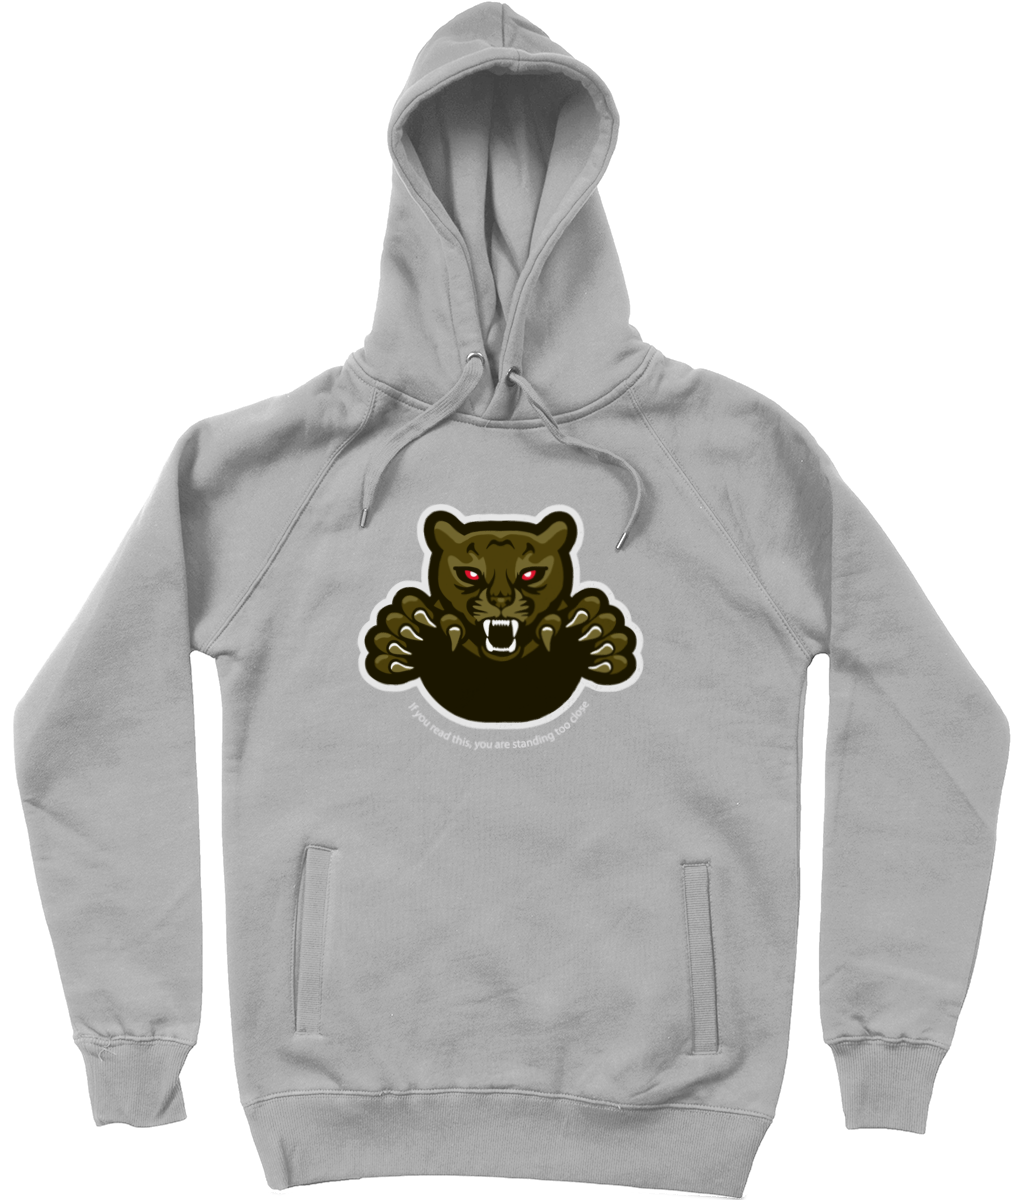 'Too Close' Graphic Panther Trendy Unisex Pullover Hoodie